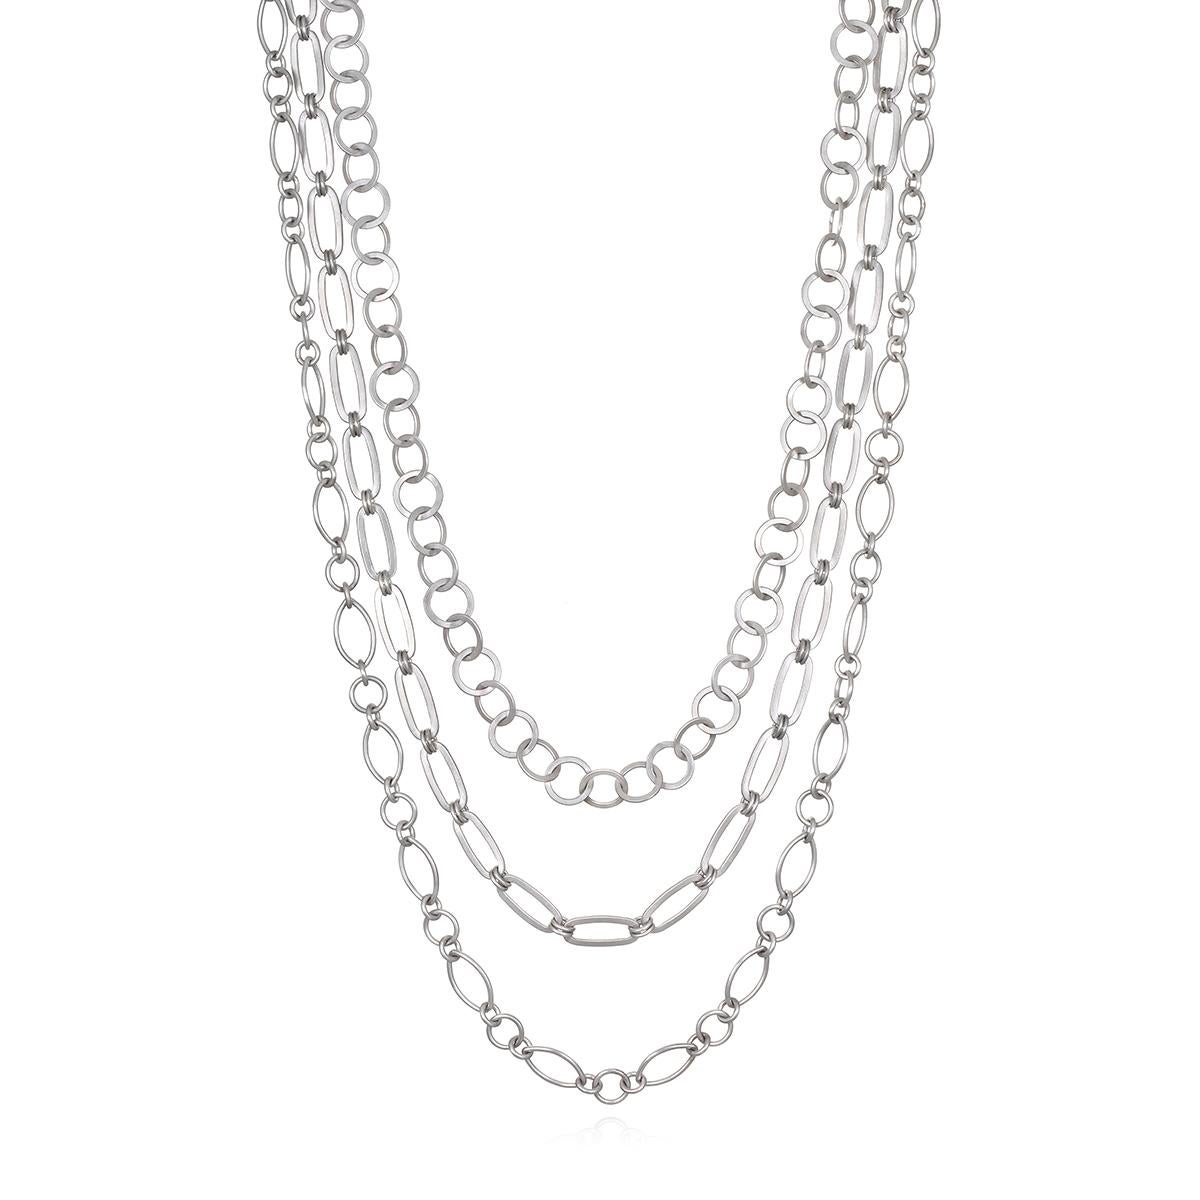 Classic and versatile, Faye Kim's Platinum Round Planished Link Chain is a perfect blend of modern and classic style...a must have for every jewelry wardrobe. This versatile piece, with its understated elegance, can be worn alone or as a layering